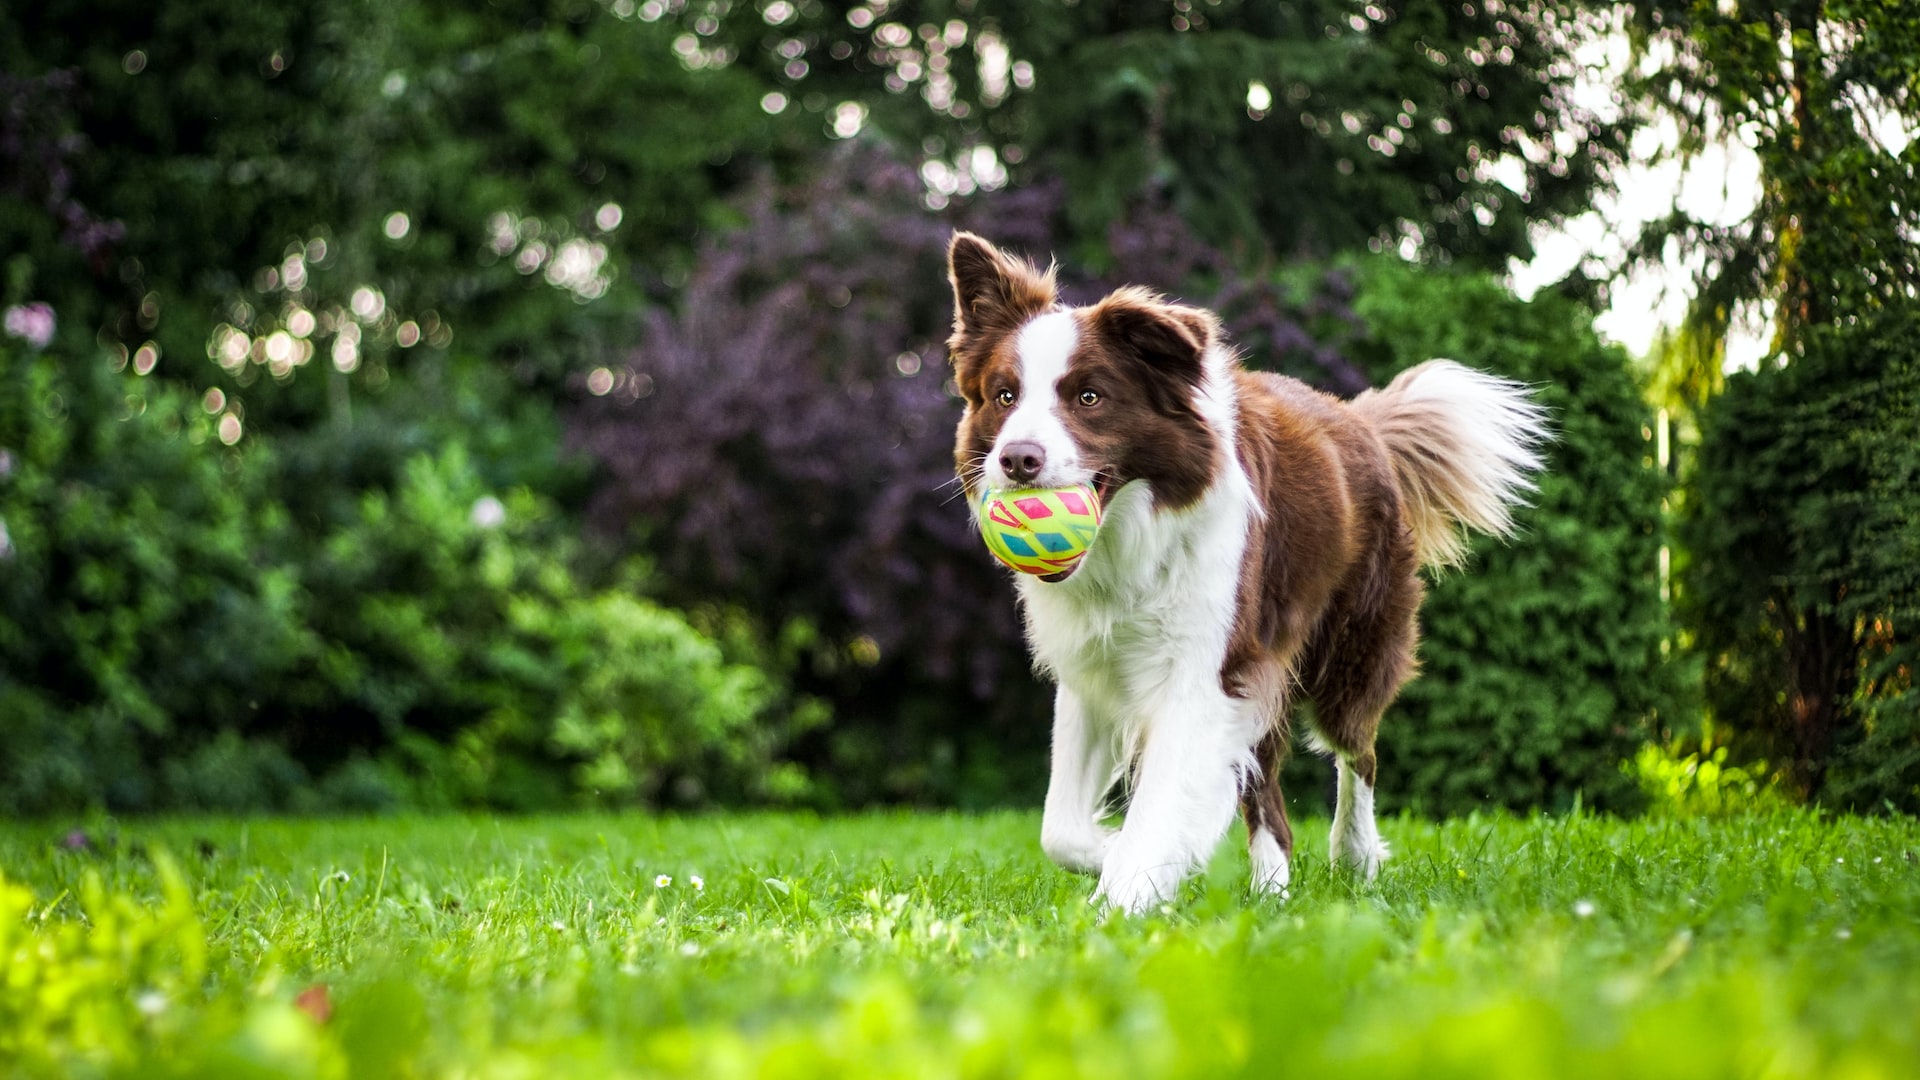 Dog boarding and training – the perfect solution for busy pet parents